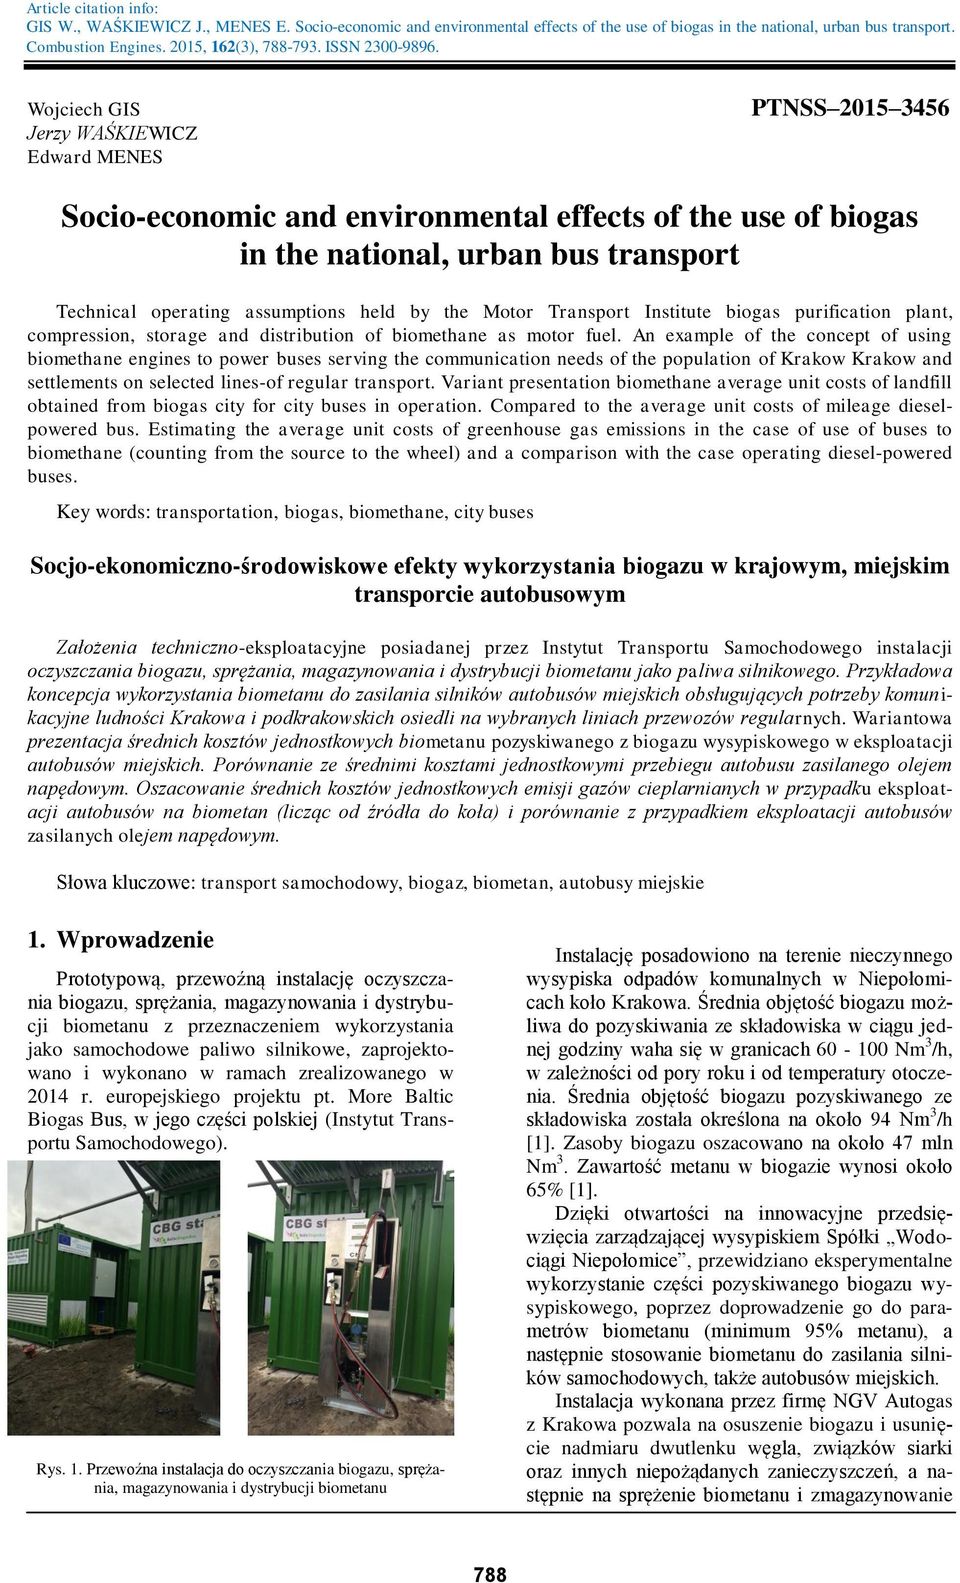 Wojciech GIS Jerzy WAŚKIEWICZ Edward MENES PTNSS 2015 3456 Socio-economic and environmental effects of the use of biogas in the national, urban bus transport Technical operating assumptions held by